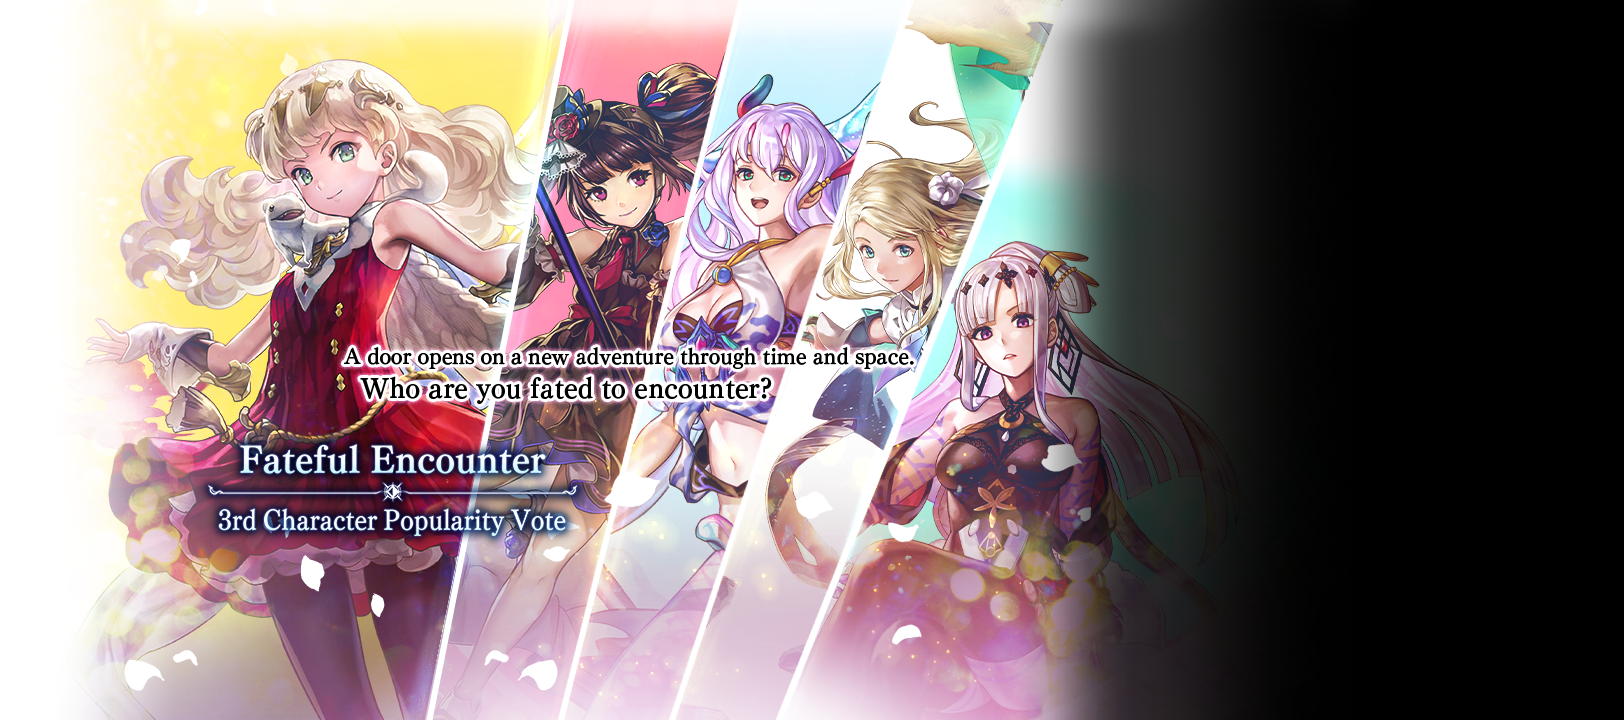 Fateful Encounter (2.11.3) 3rd Character Popularity Vote.png